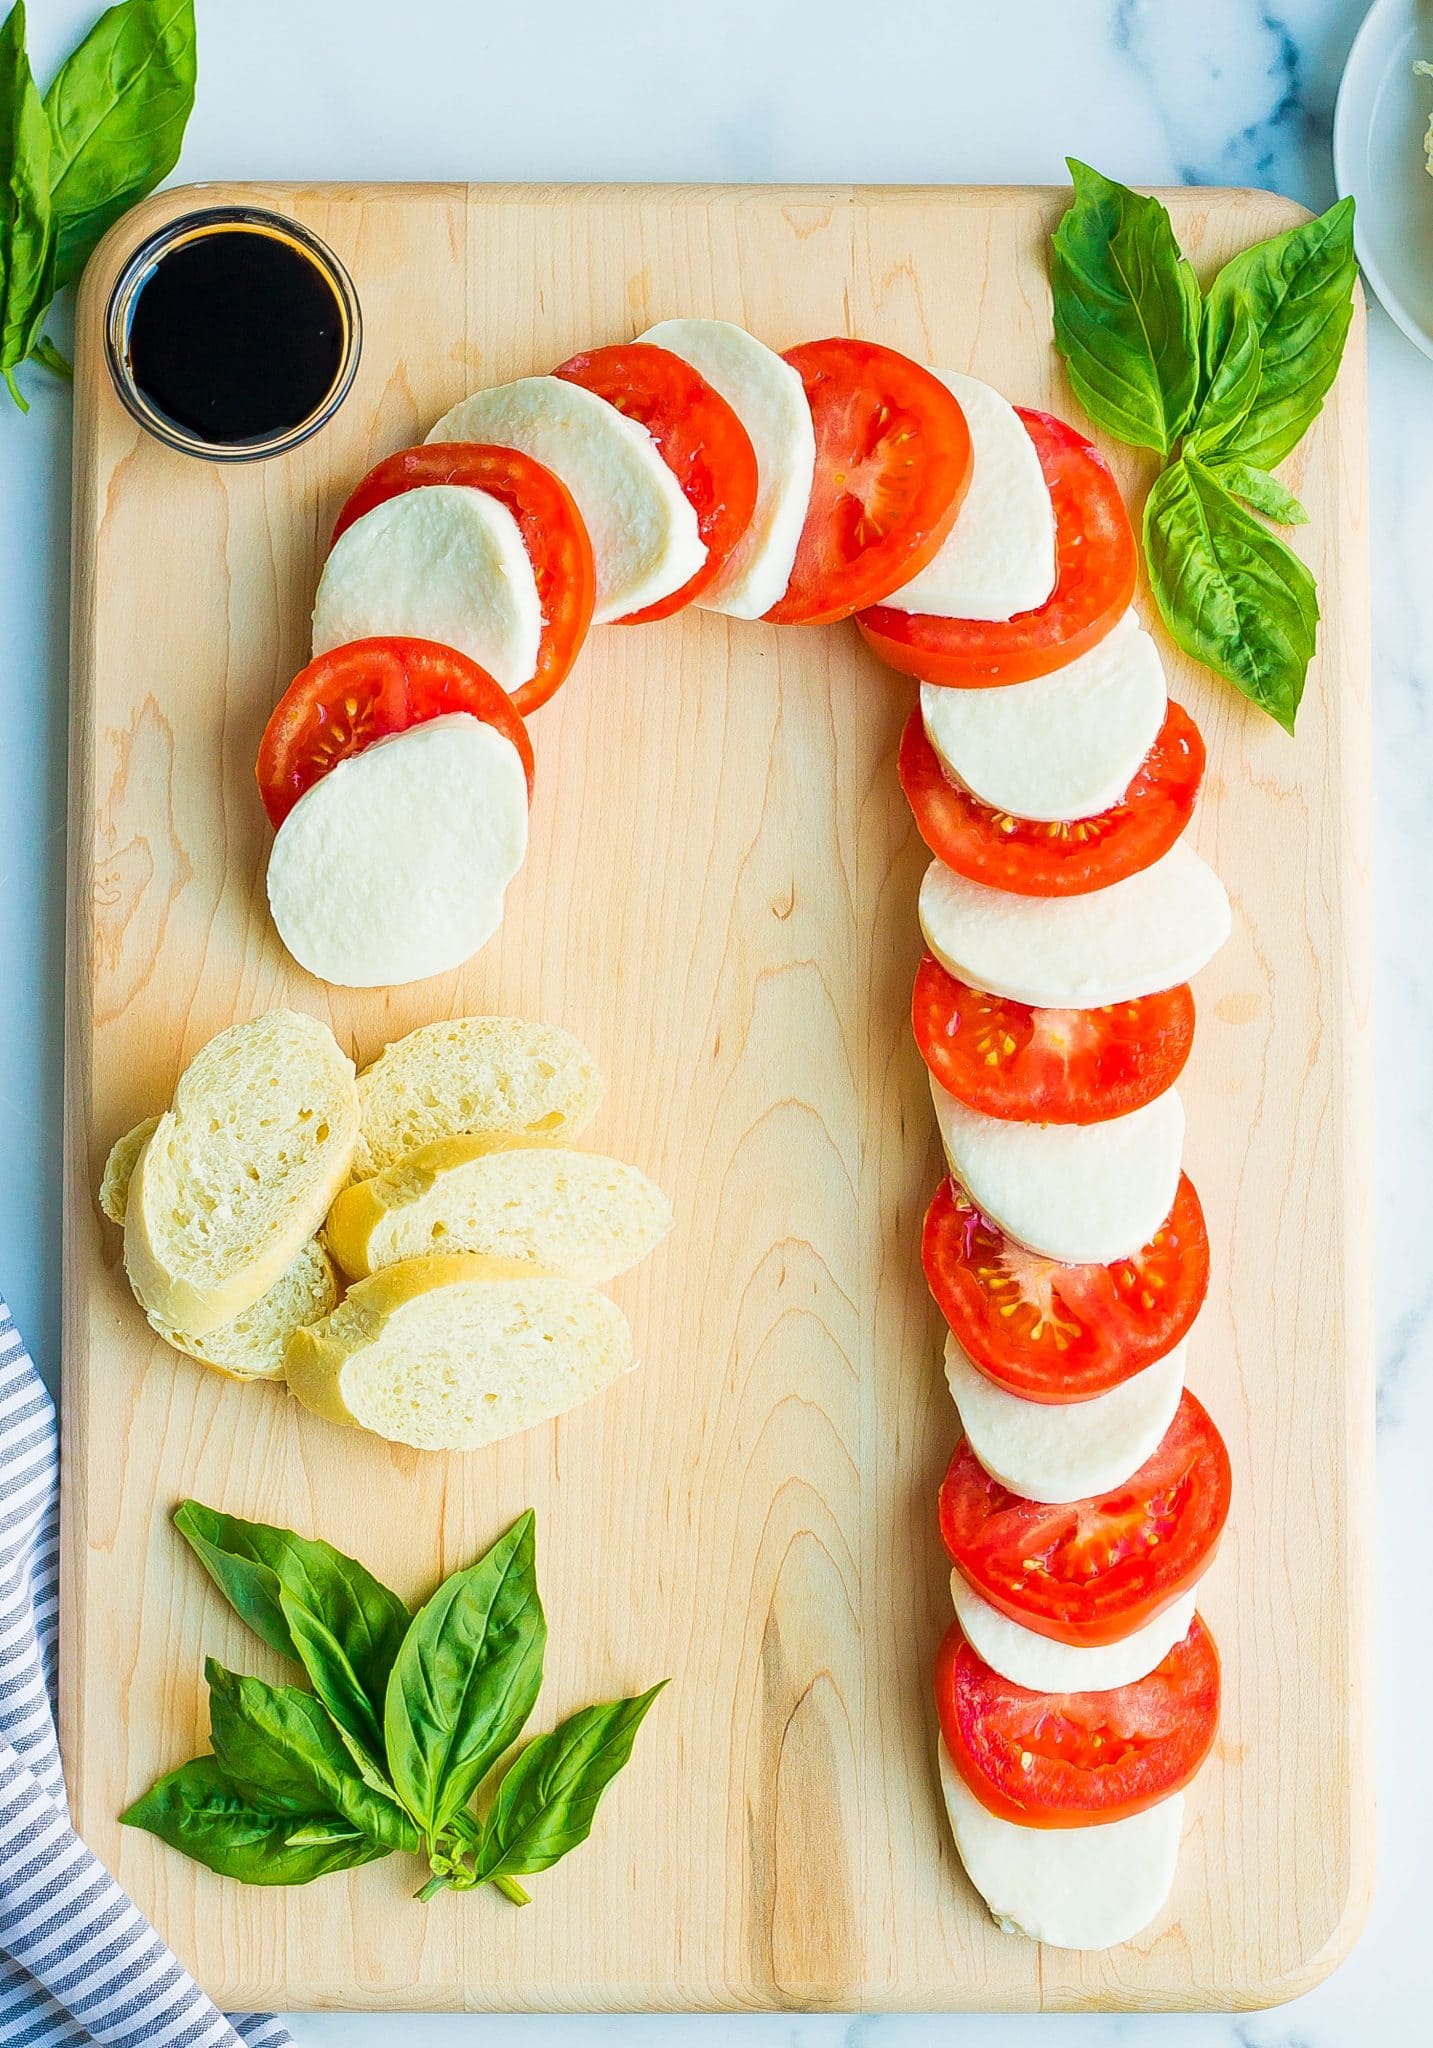 candy cane shaped cheese and tomato board